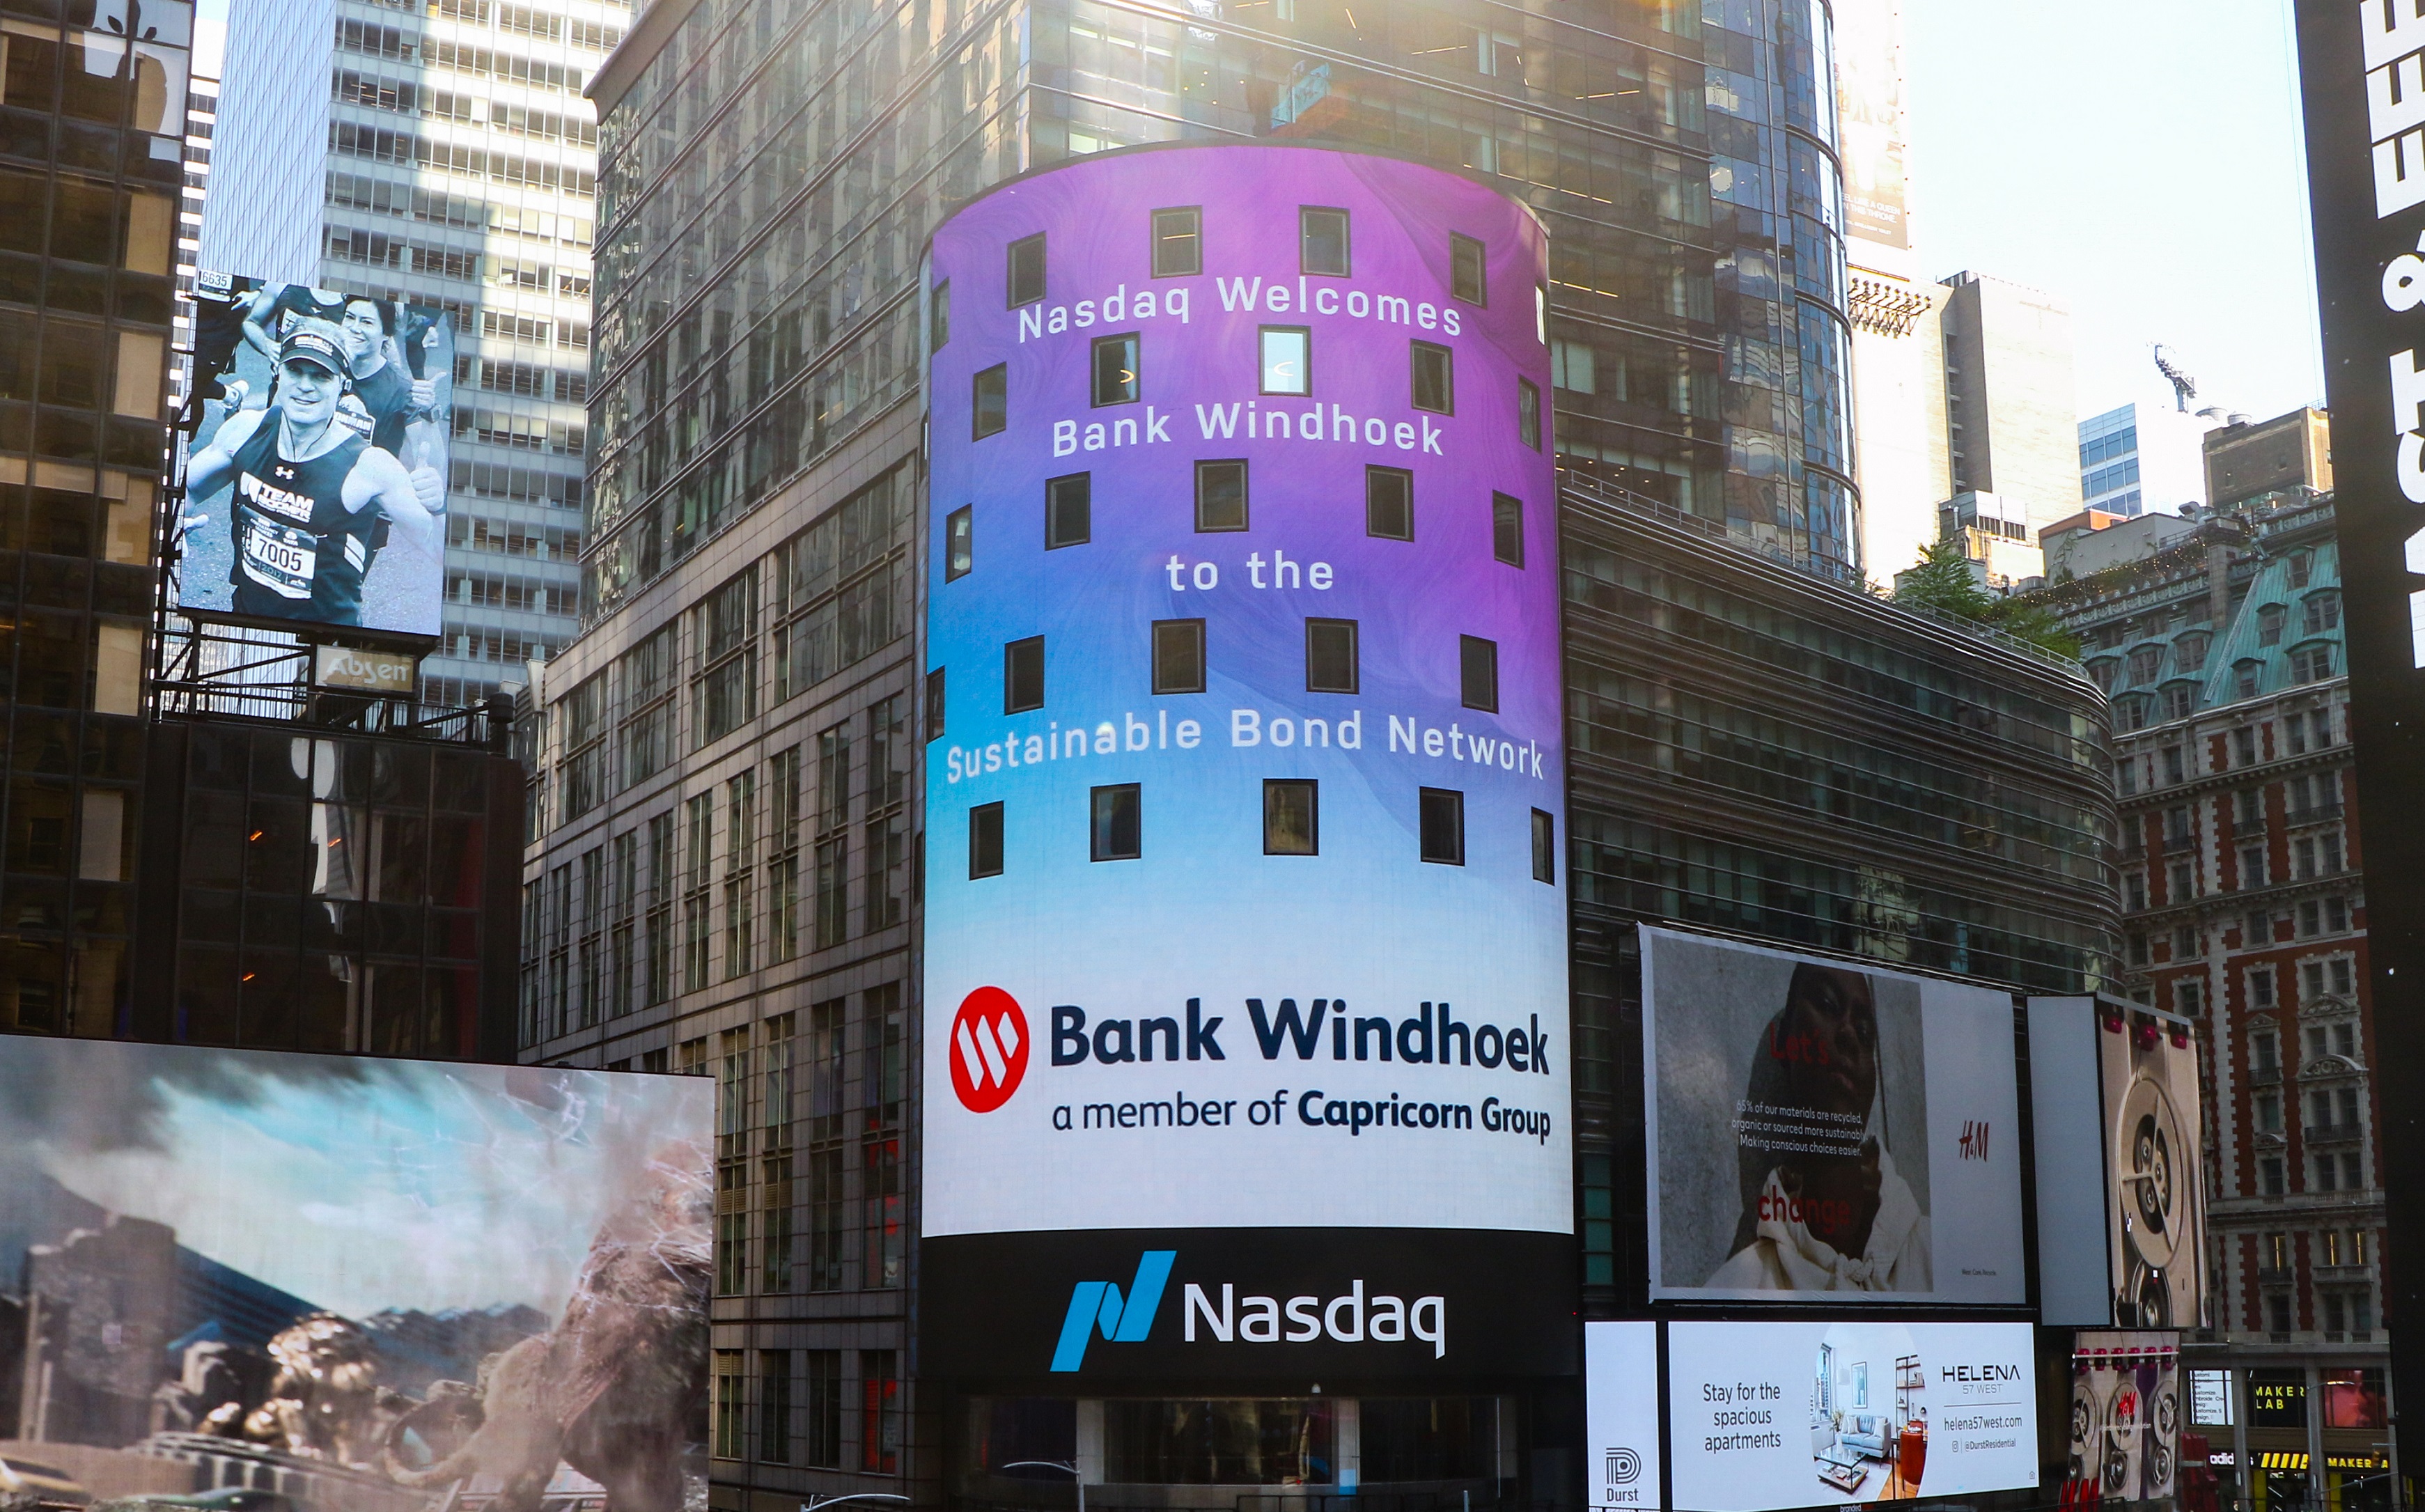 Nasdaq welcoming Bank Windhoek to the Sustainable Bond Network, in Times Square, New York City.